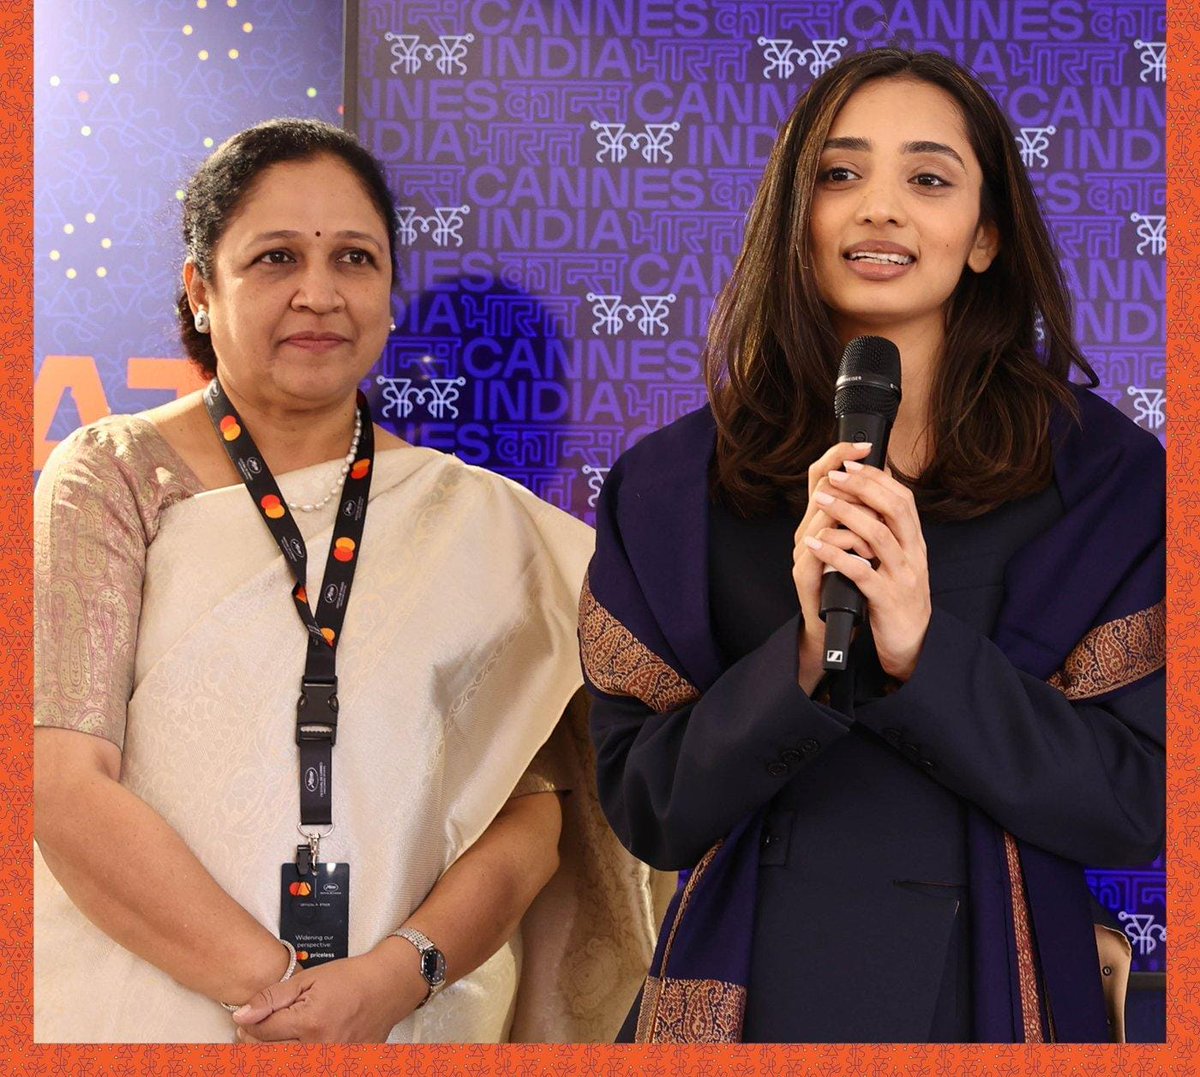 At the #BharatPavilion, Cannes 2024, participants acquired deeper insights into the promising future of Marathi cinema through screenings, panel discussions, and interactive sessions #IndiaAtCannes #Cannes2024 @MIB_India @nfdcindia @DDNewslive